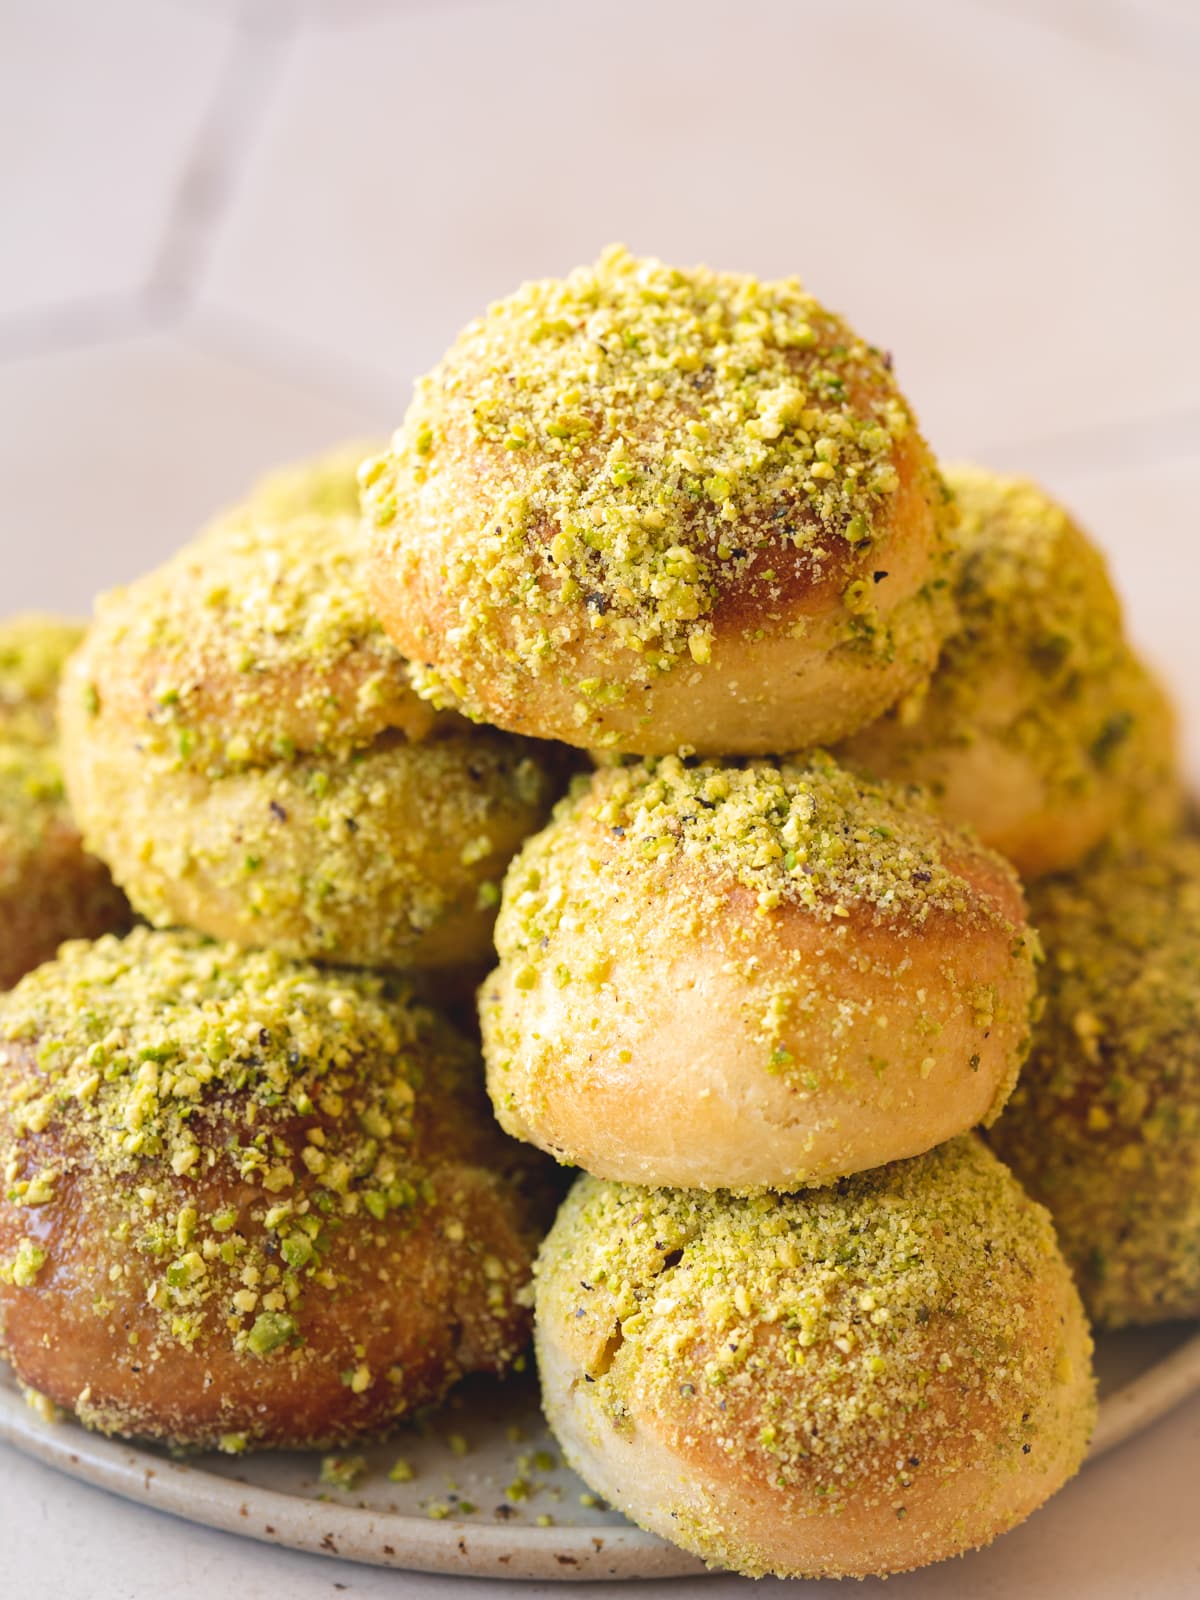 a plate with fried and baked vegan doughnuts coated in sugar, condensed milk, and ground pistachios.